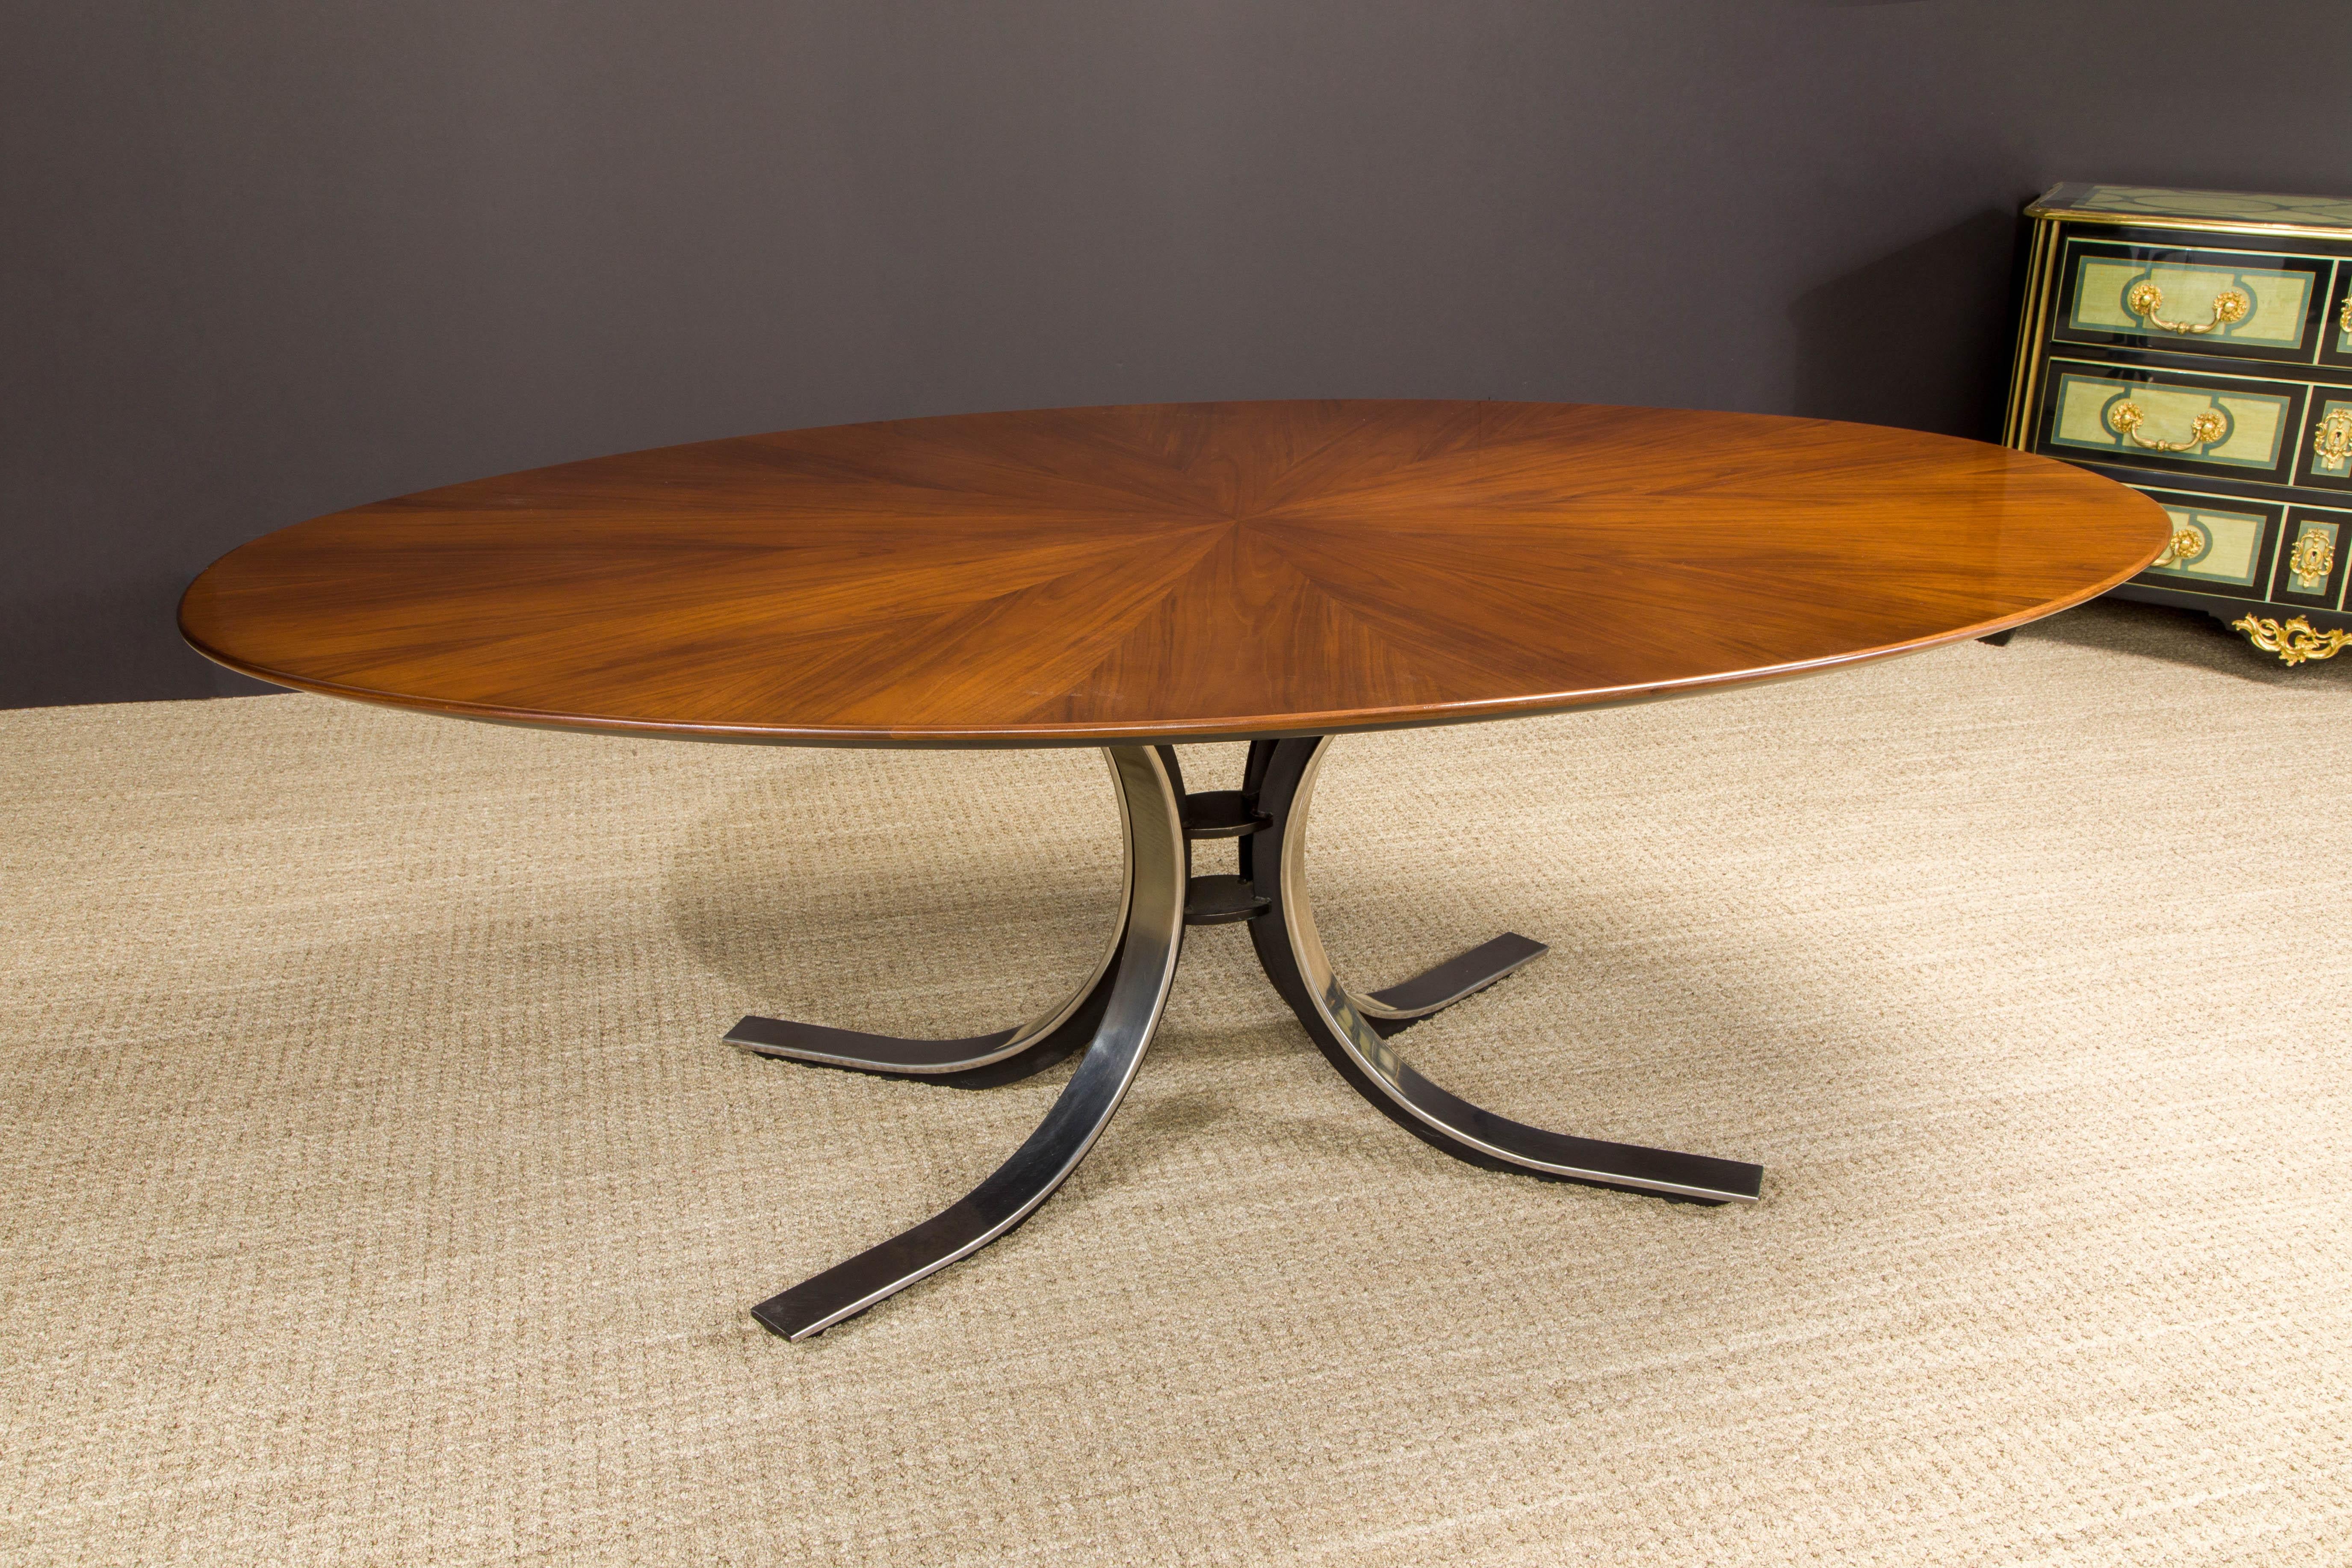 Late 20th Century Starburst Oval Dining Table by Osvaldo Borsani for Stow Davis, 1970s, Refinished